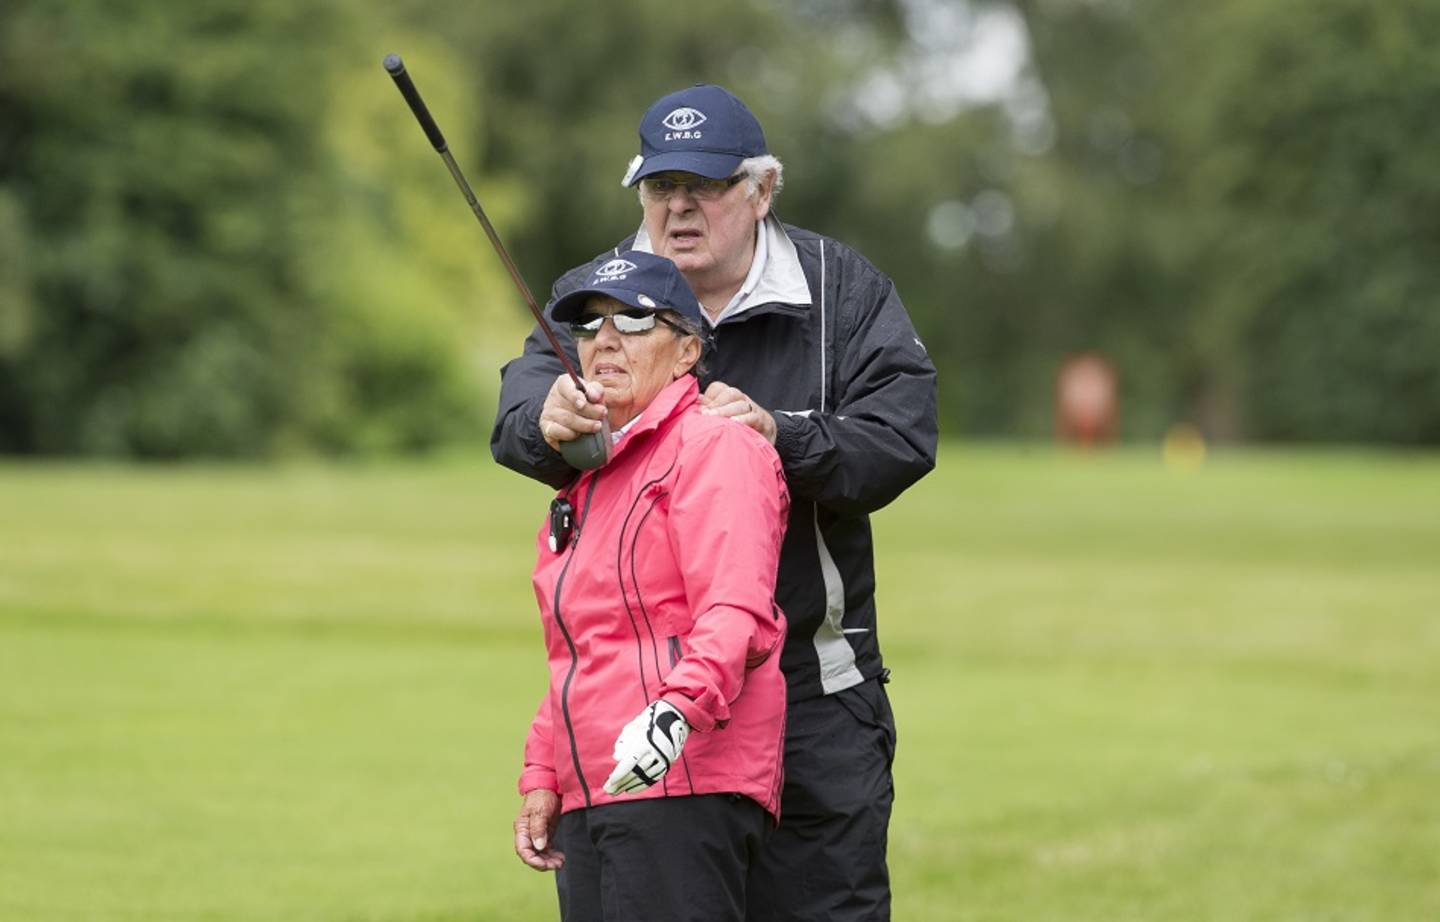 Visually impaired women playing golf
